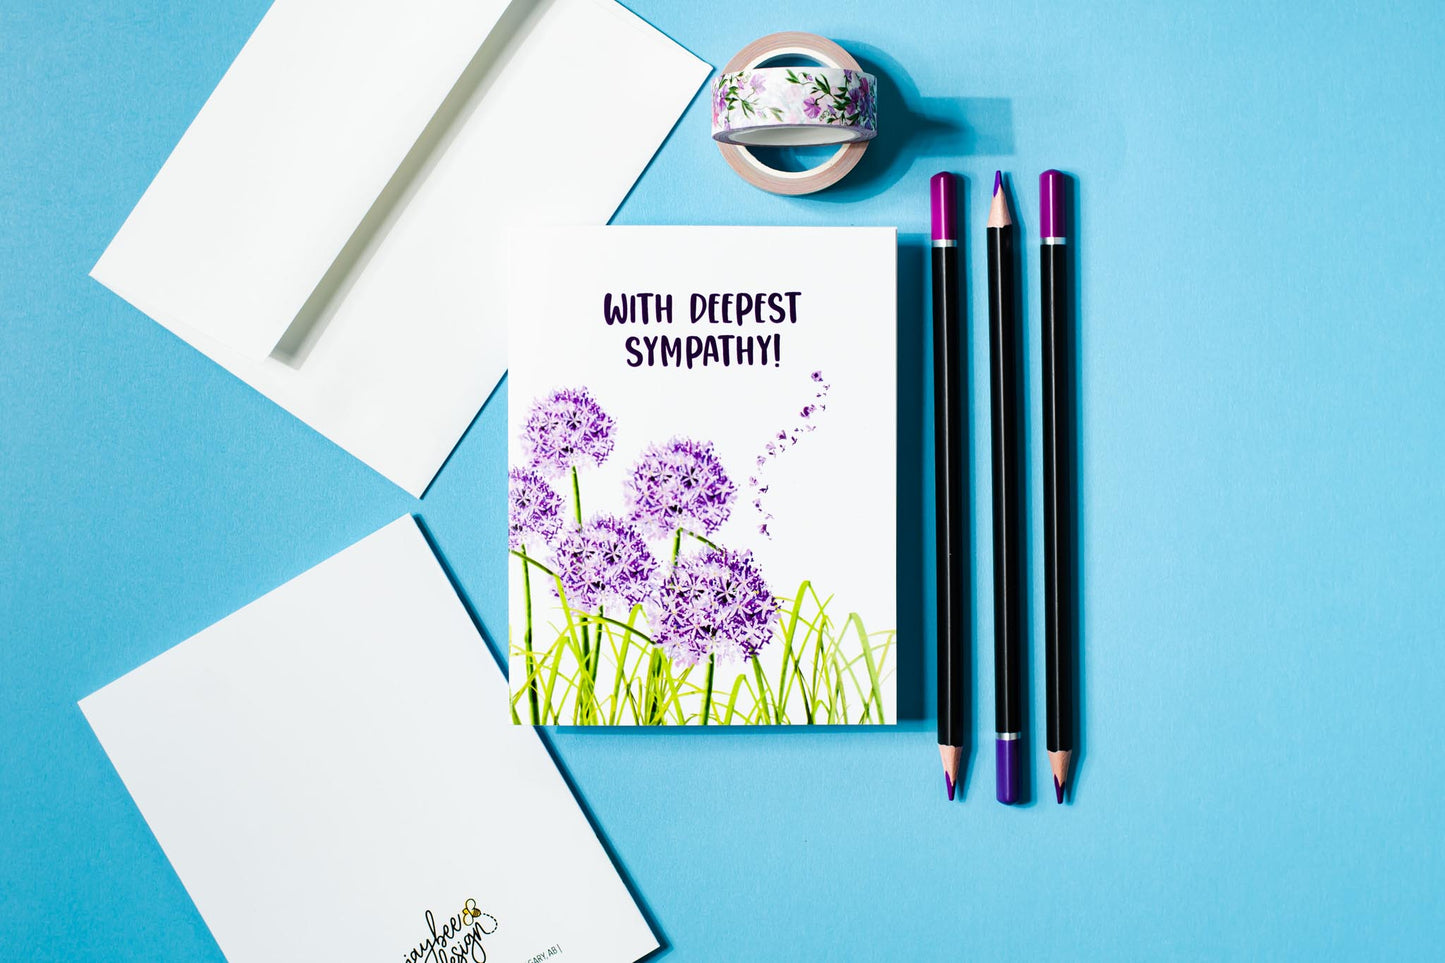 With Deepest Sympathy - Greeting Card